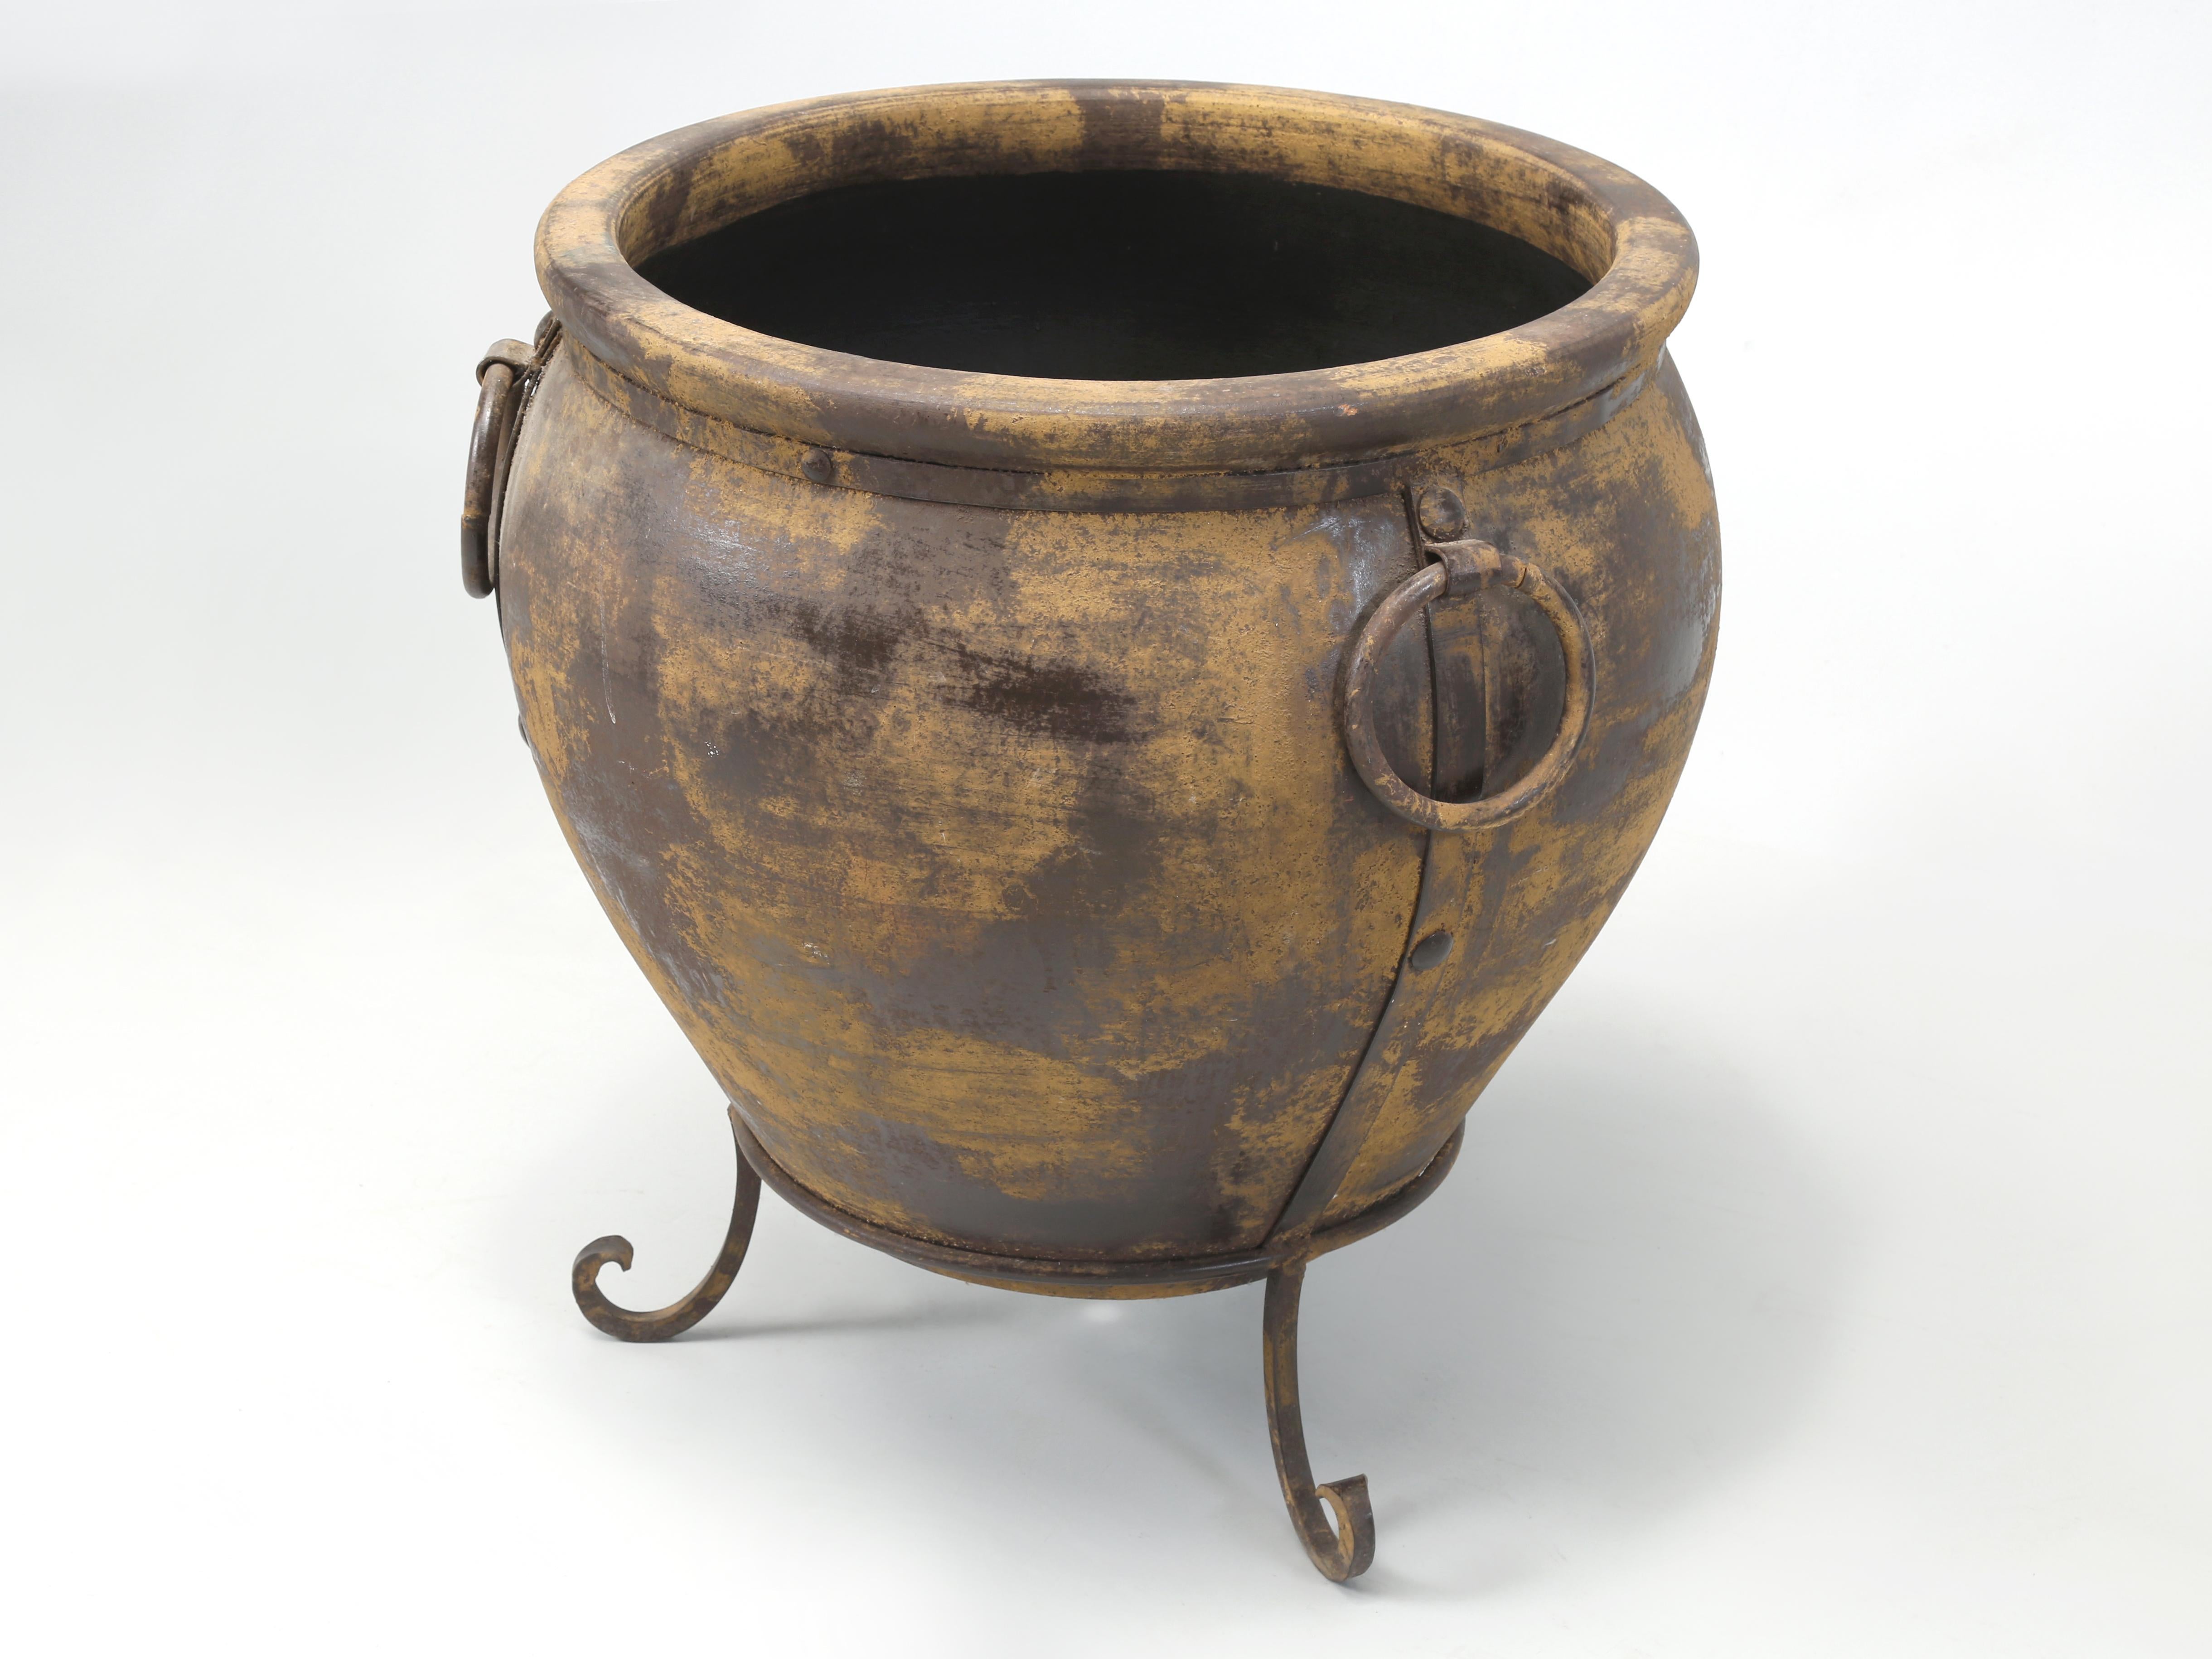 Huge Indoor or Outdoor Garden Planter made from Terracotta and resting on a wrought iron base. The pot has Survived several Winters, but I certainly would cover it up. The Planter is large enough to hold a decent size tree as you can see in the last